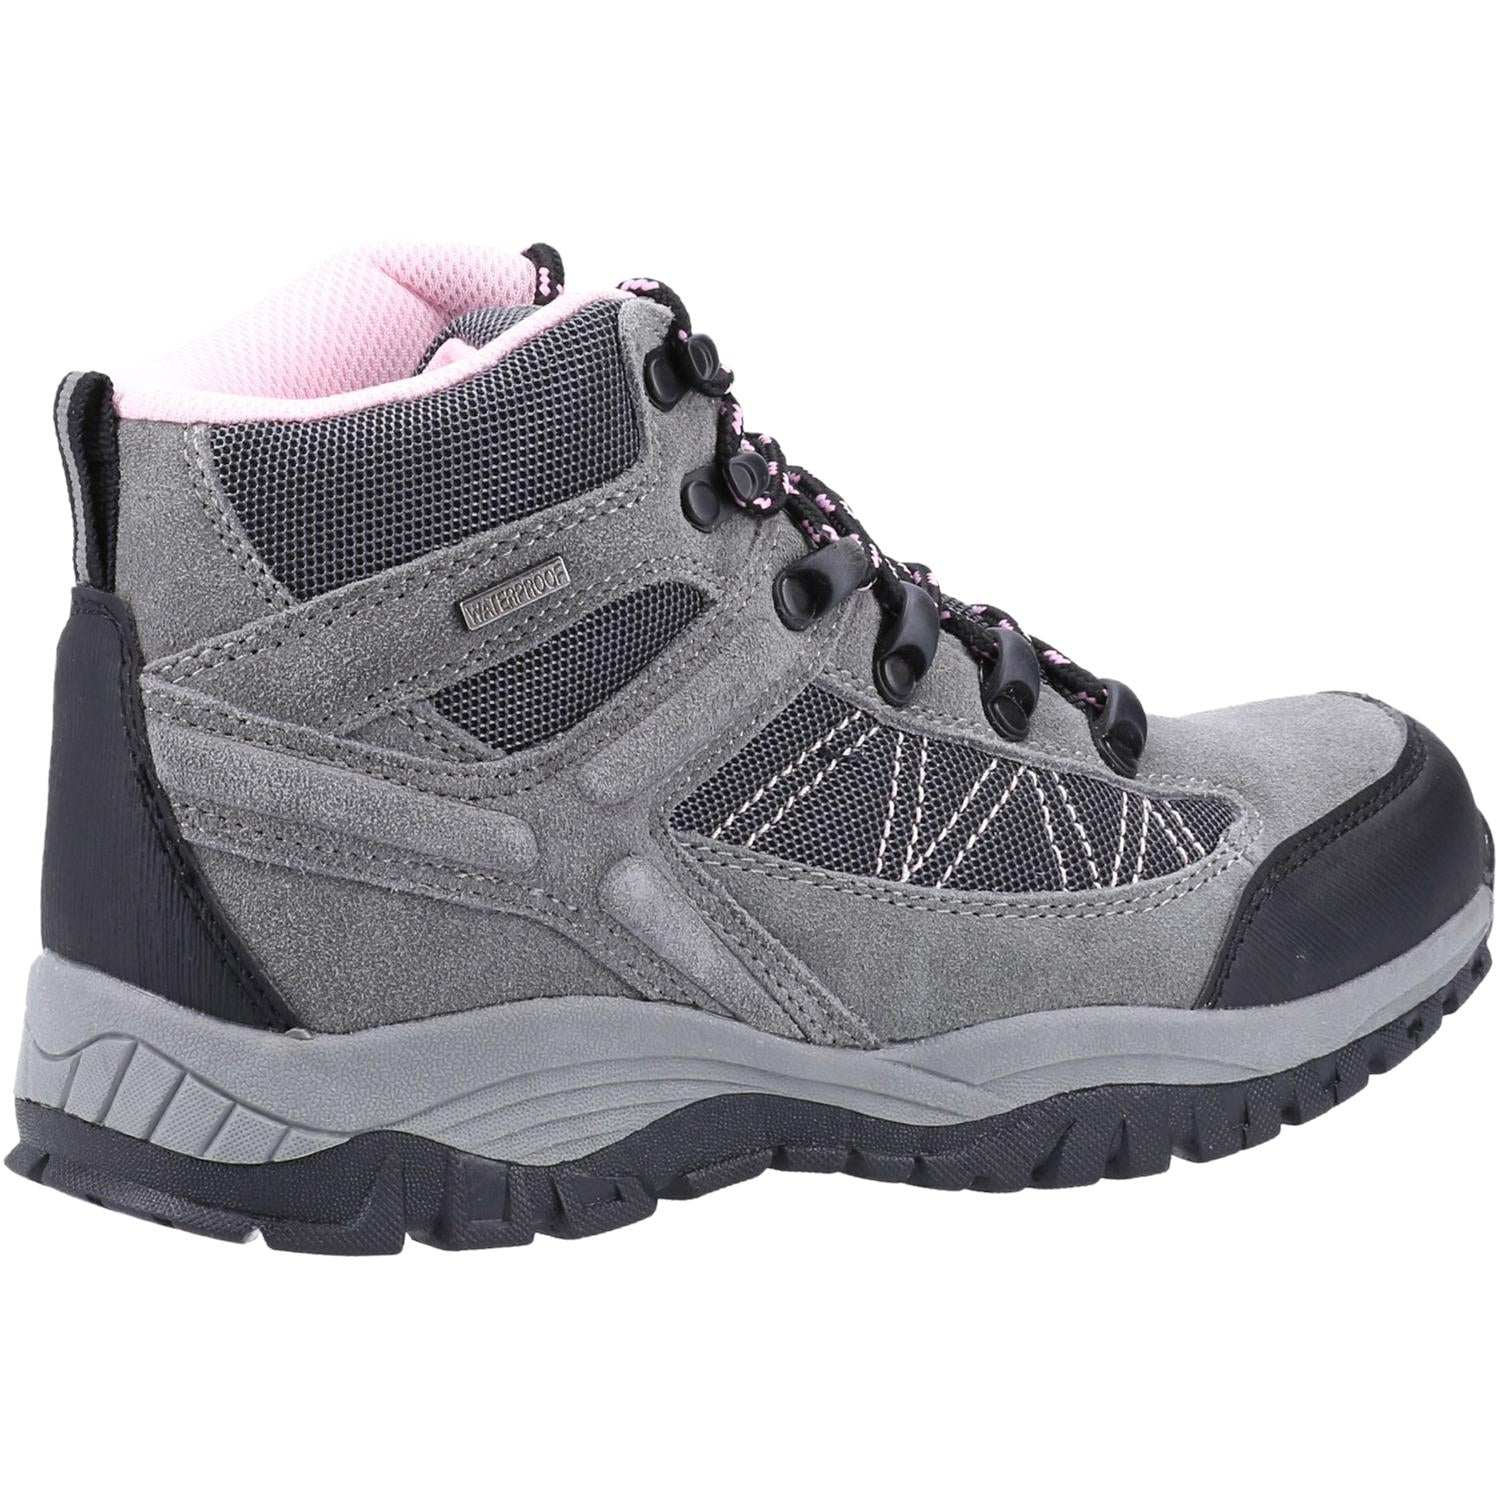 Cotswold Maisemore Ladies Hiking Boot